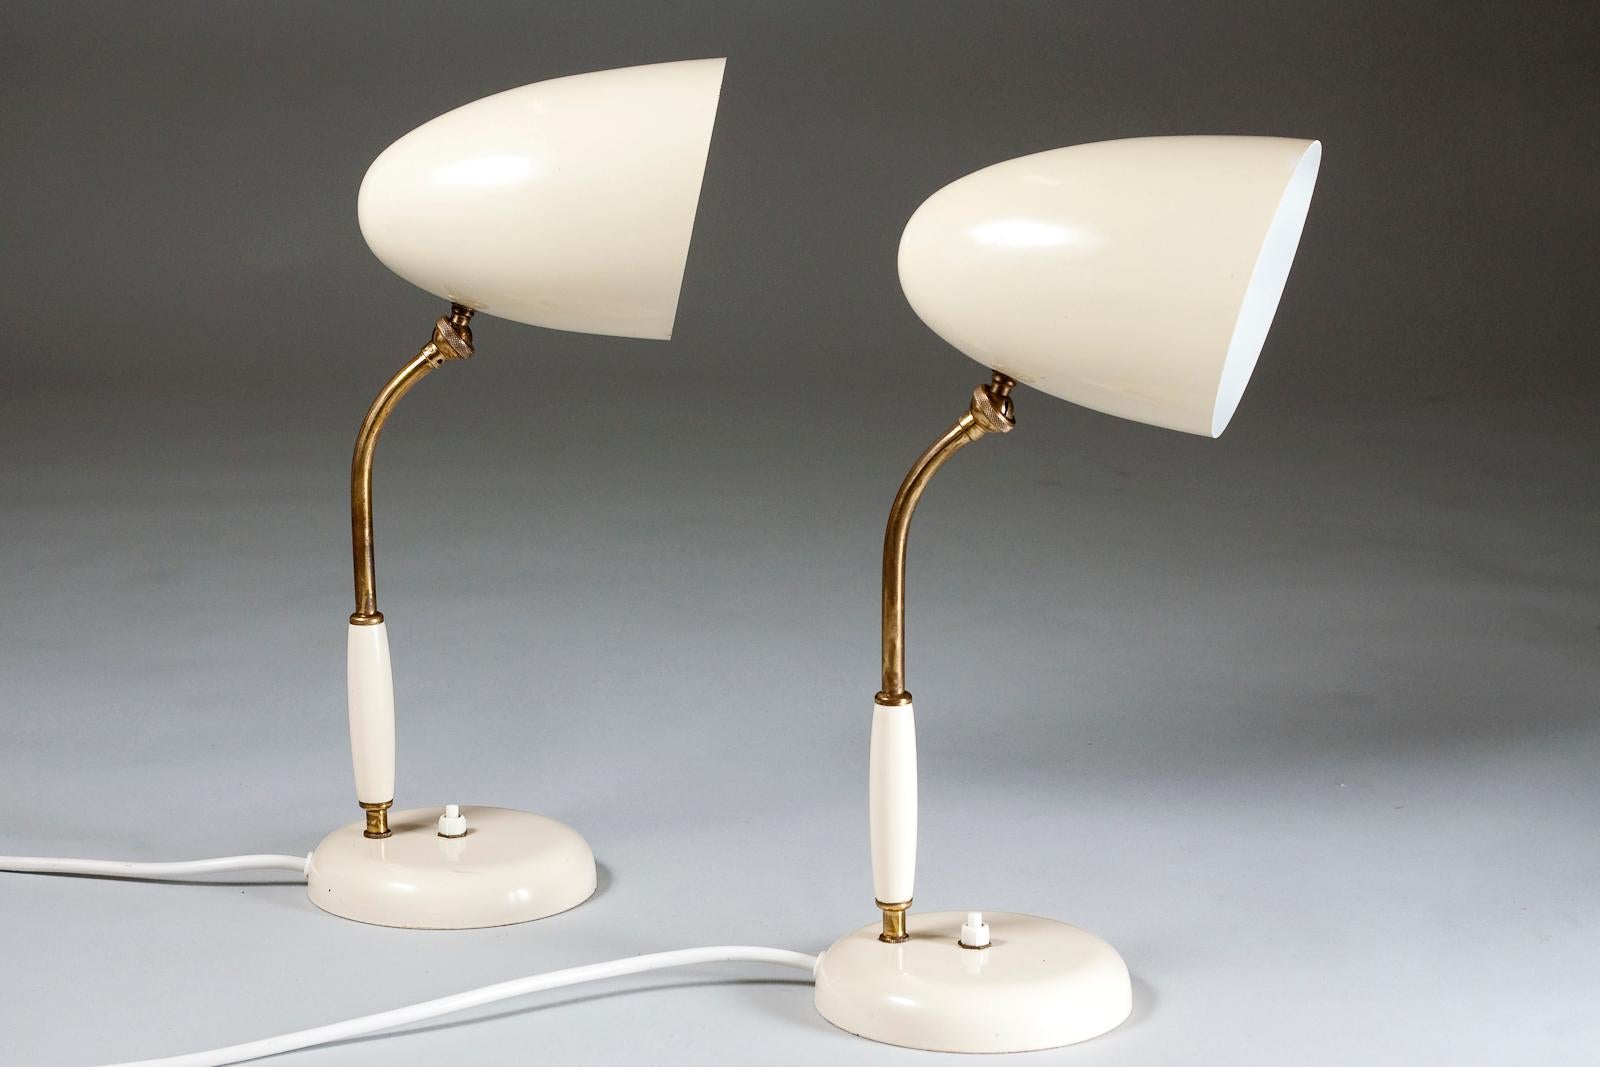 Painted Pair of Finnish White Mid-Century Modern Table Lamps by Stockmann Oy, Finland